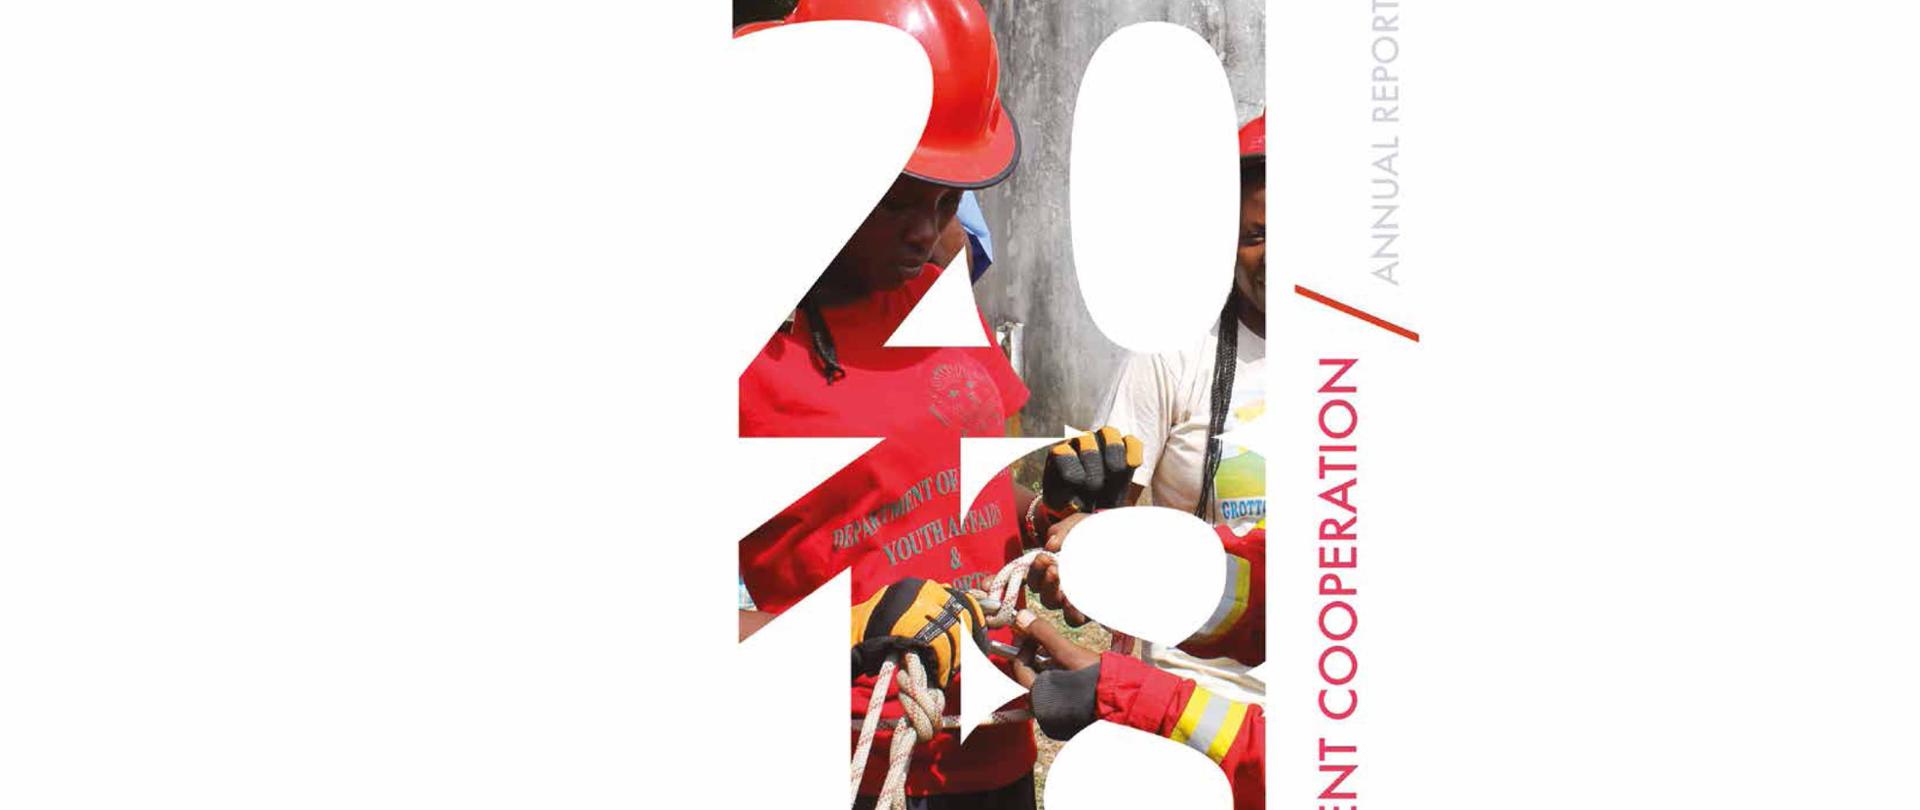 on the cover of publication numer 2018 there are two women who are trained to be fireworkers with the title Polish Development Coorperation - 2018 Annual Report